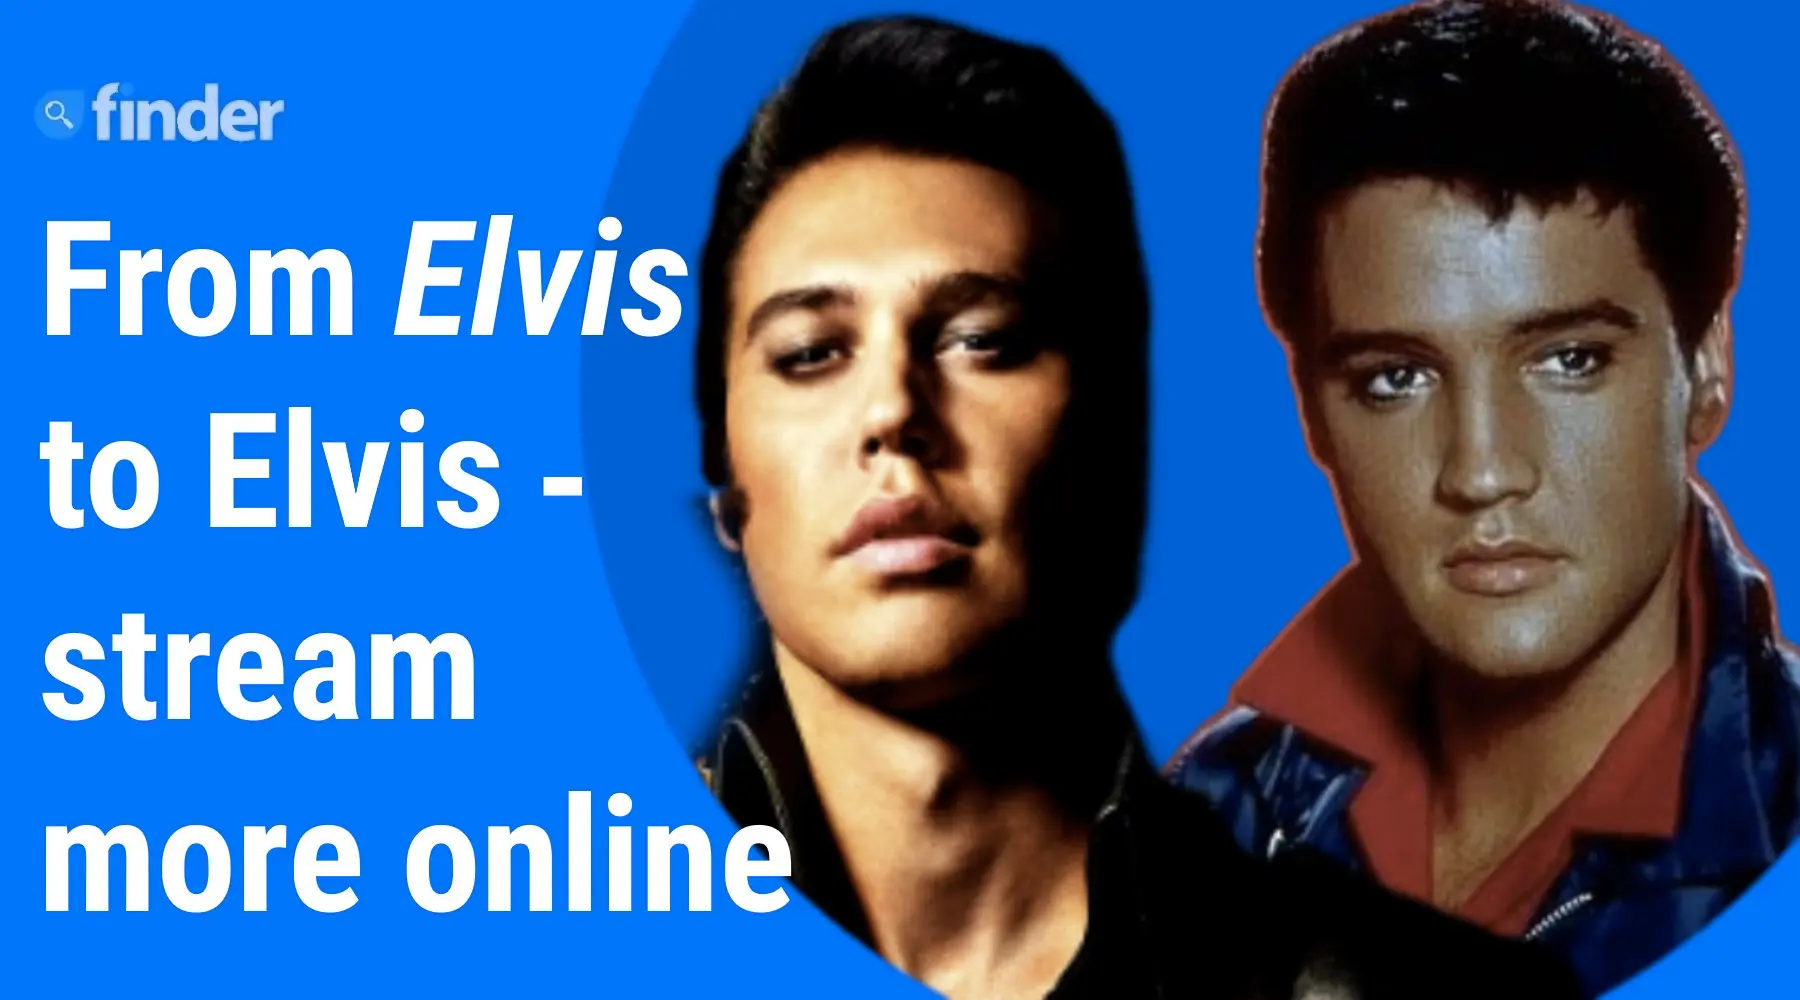 Stream more about Elvis after seeing the new movie Here's how Finder